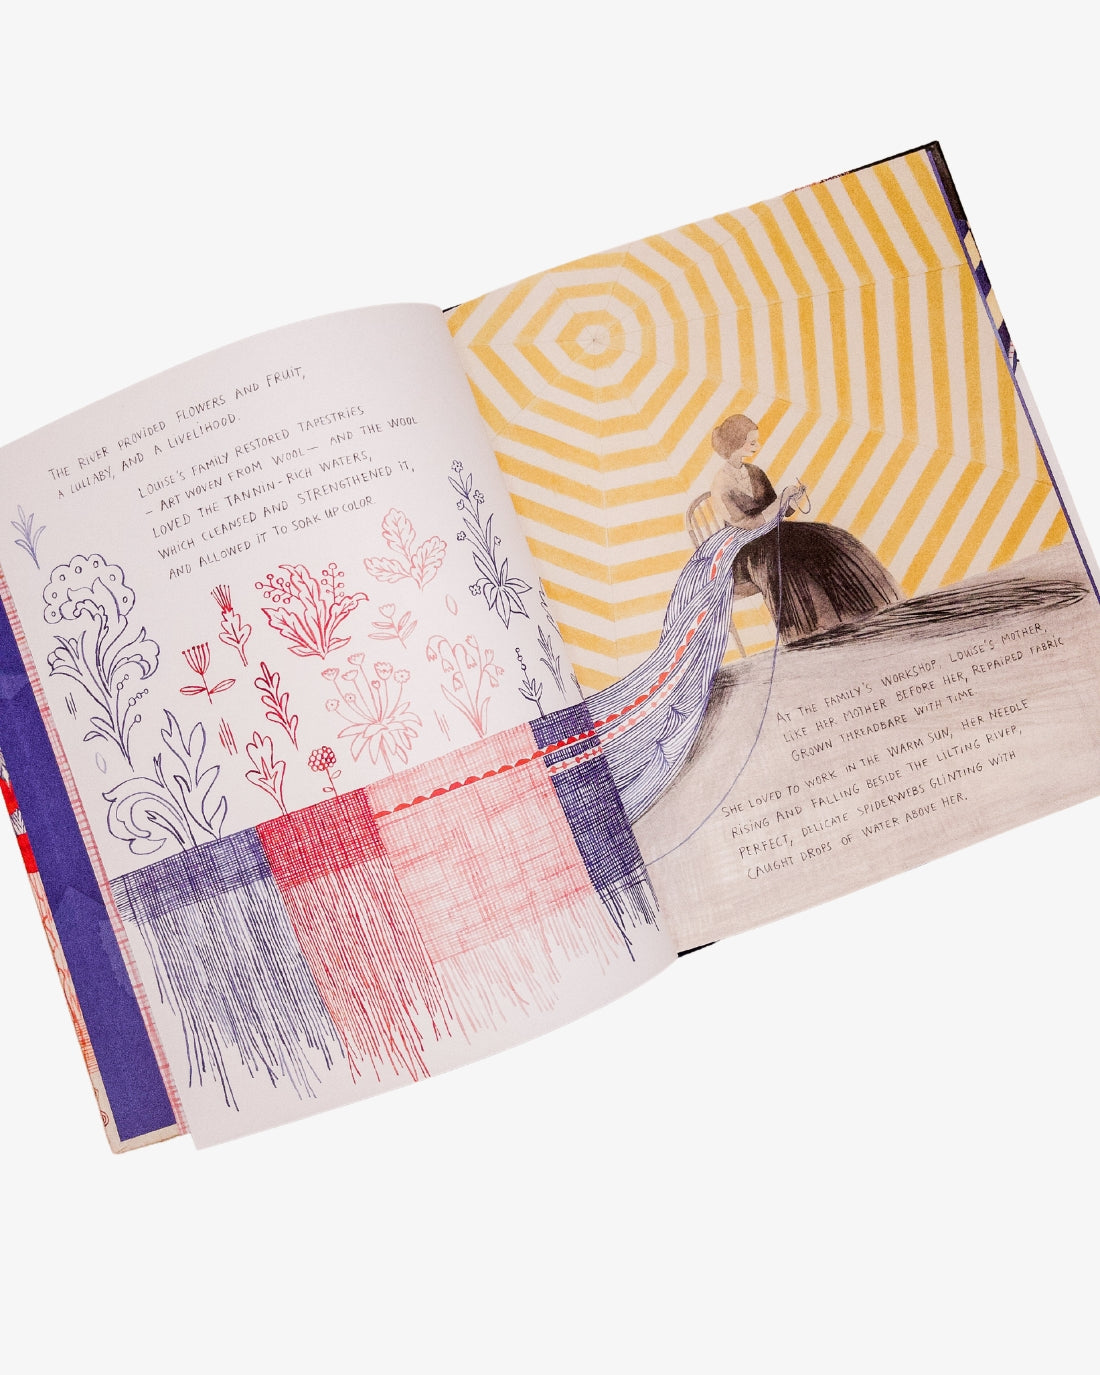 Cloth Lullaby: The Woven Life of Louise Bourgeois by Amy Novesky and Isabelle Arsenault